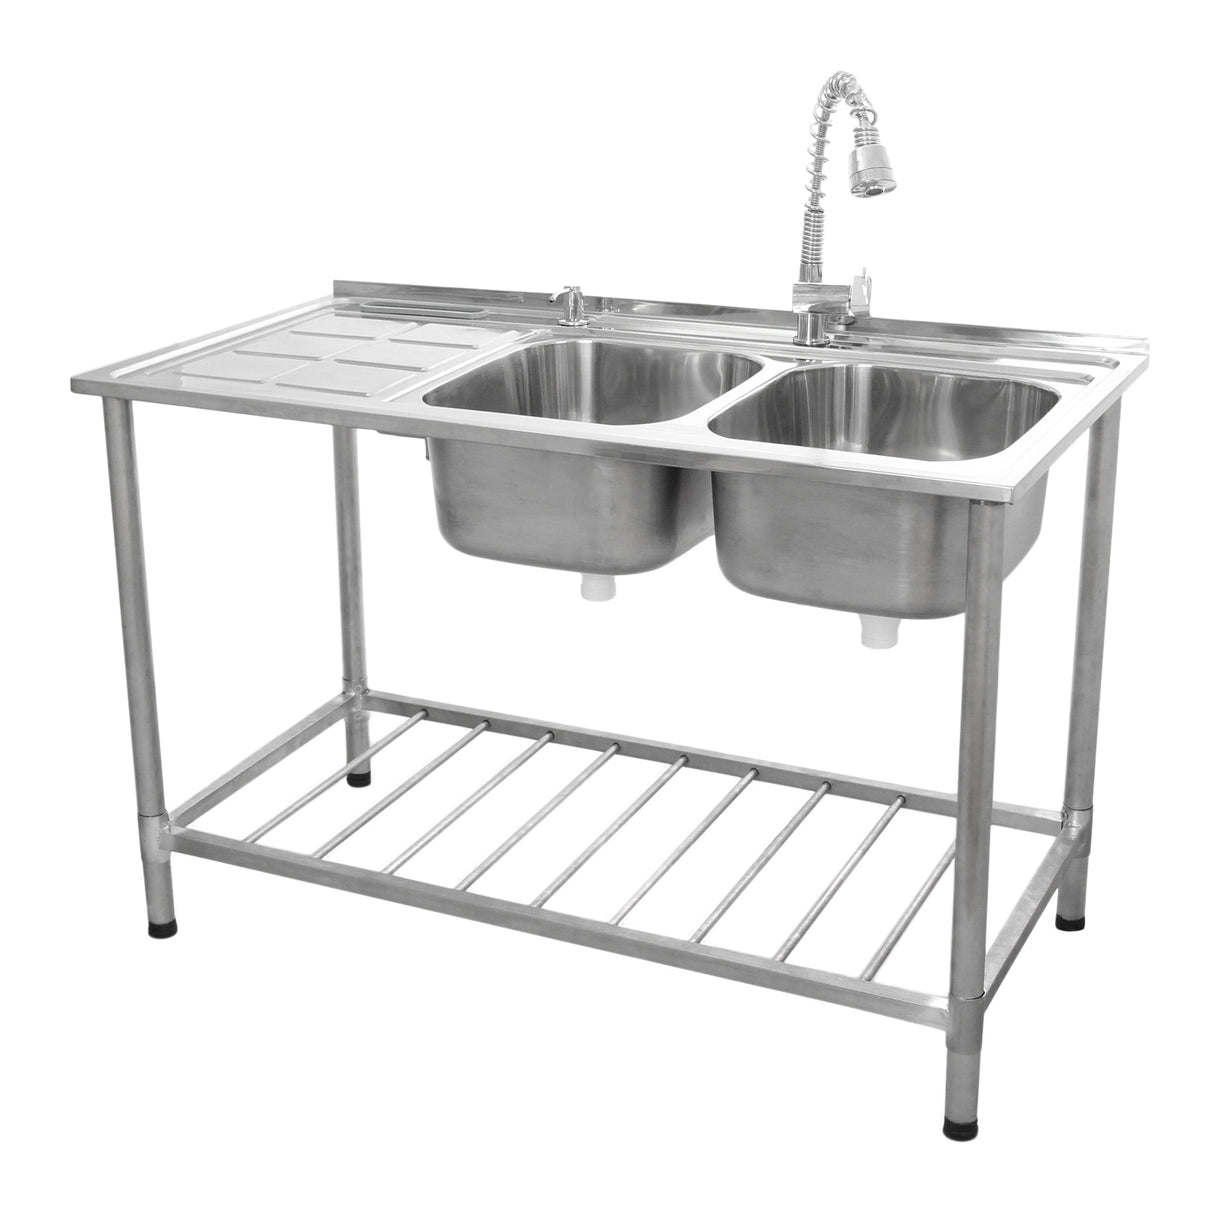 KuKoo Commercial Catering Sink Double Bowl / Left Hand Drainer